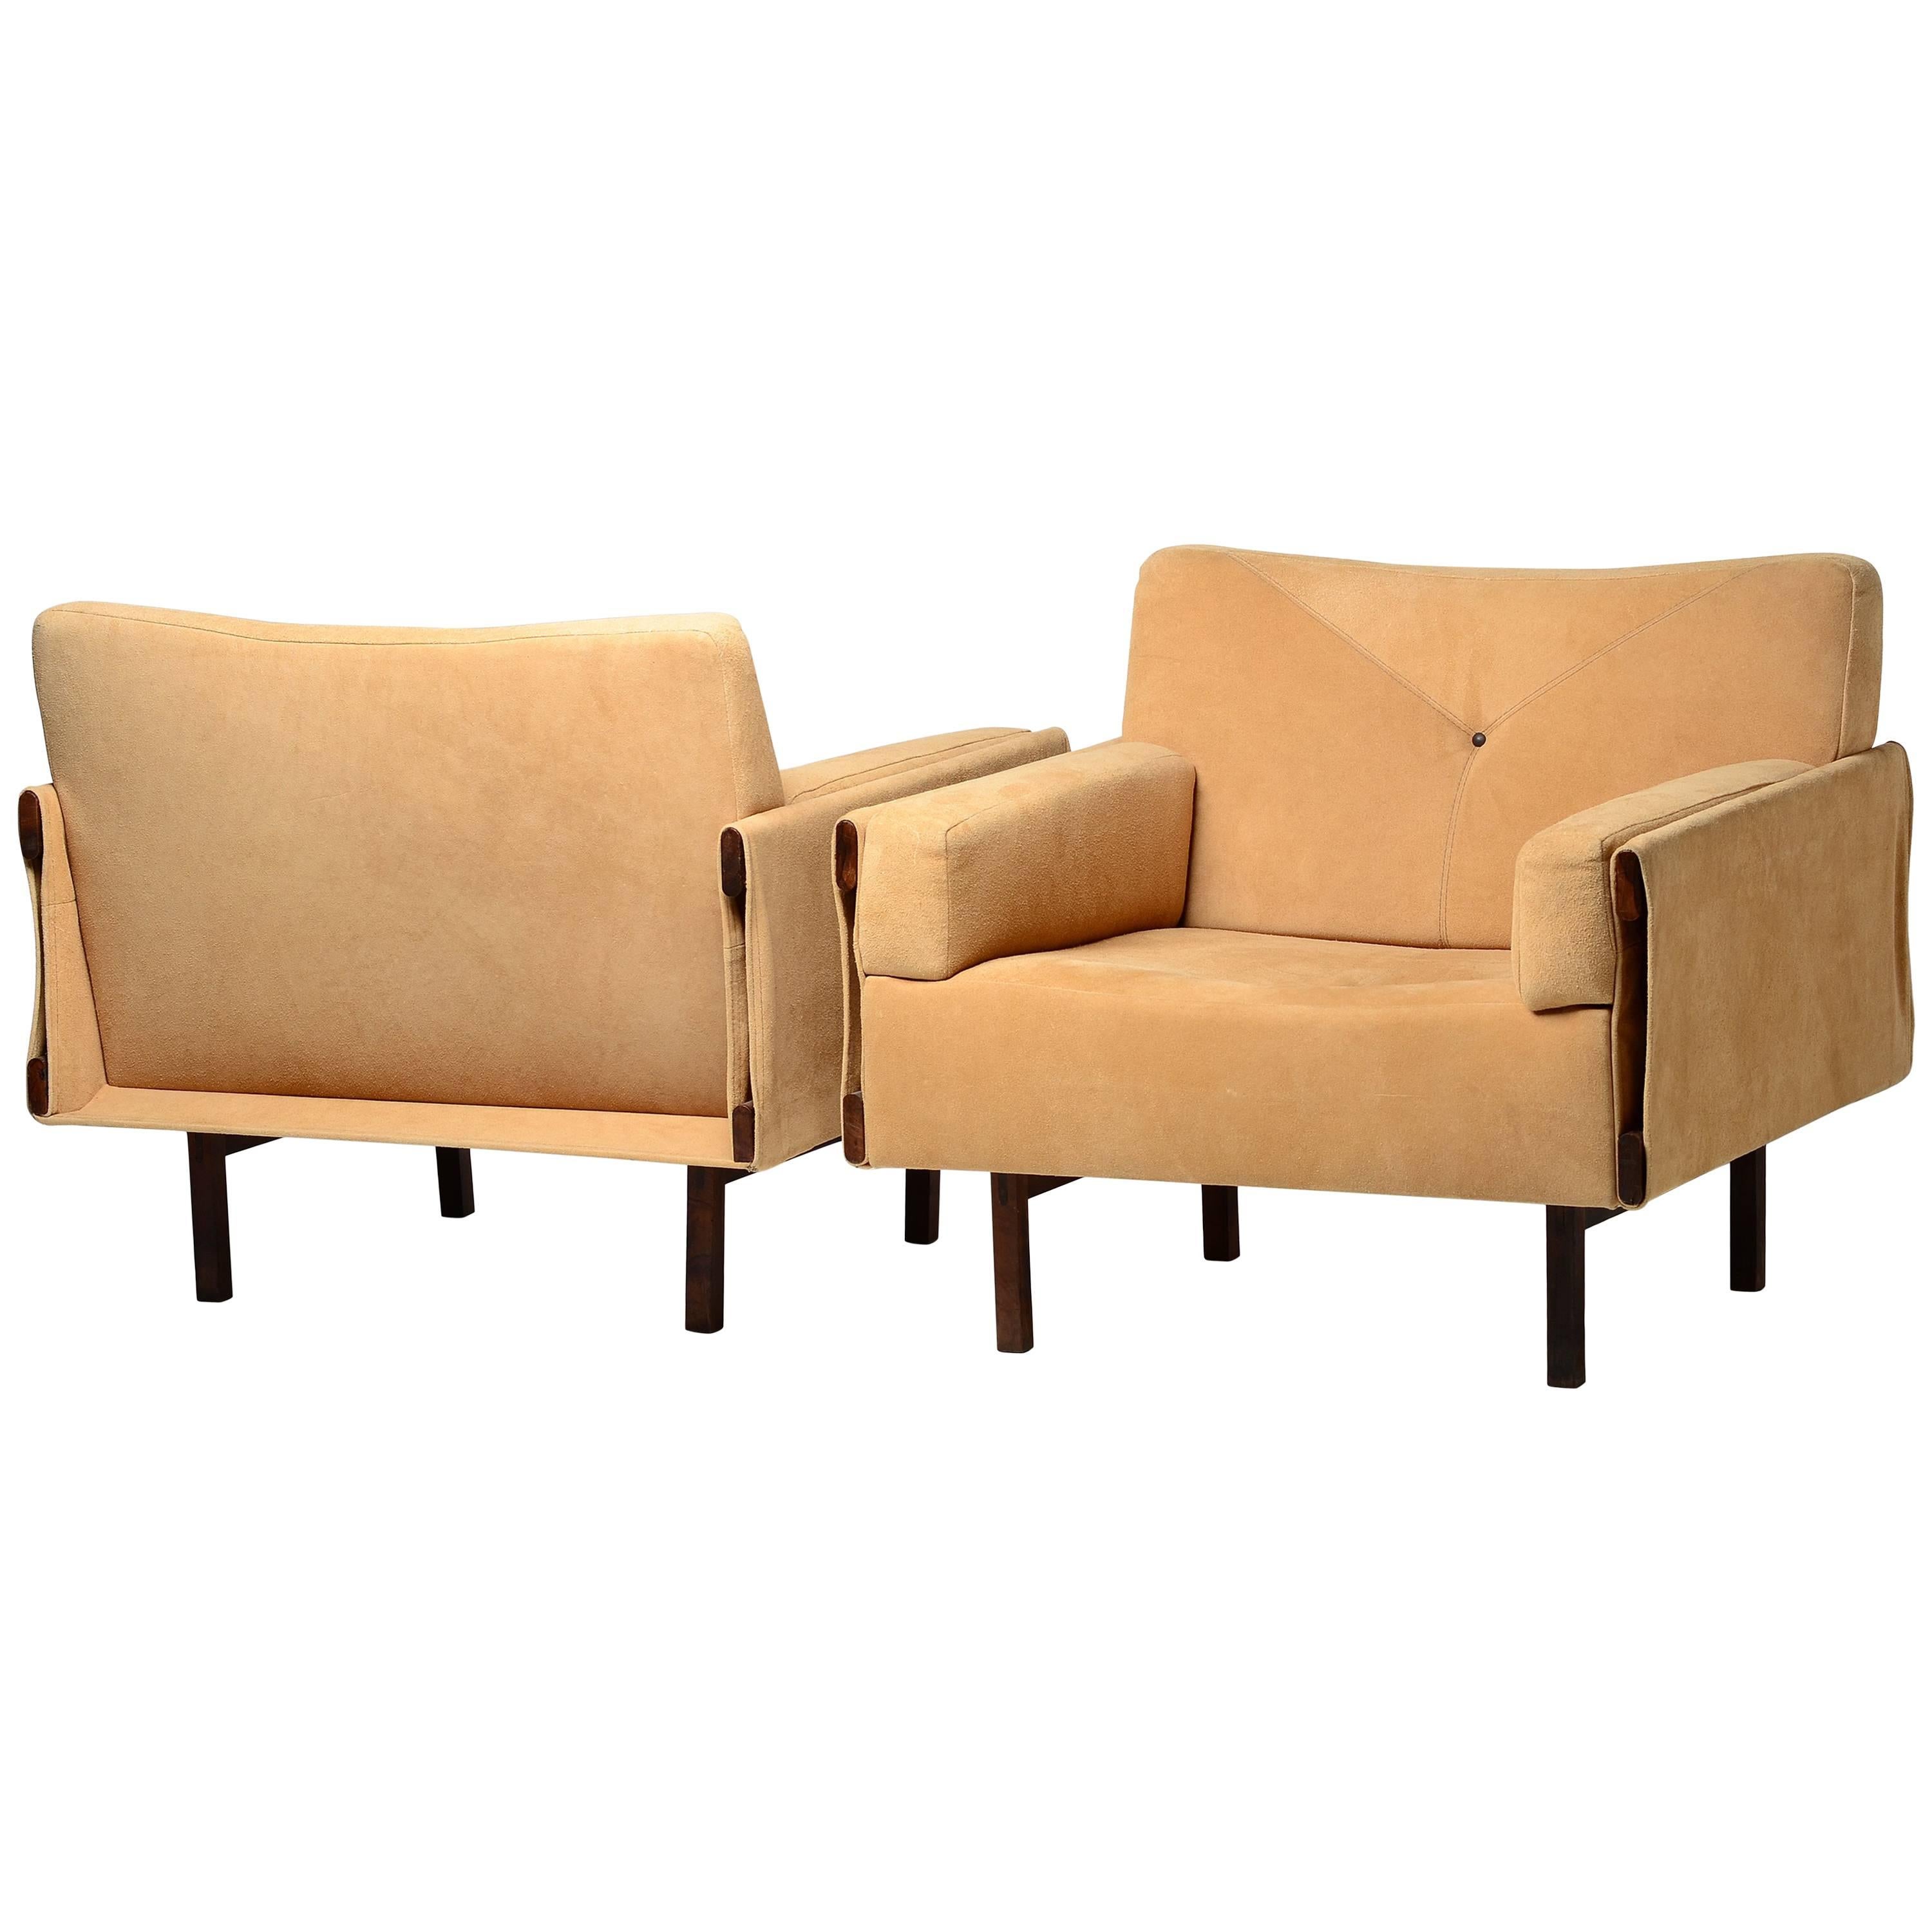 Pair of Jorge Zalszupin Lounge Chairs in Suede